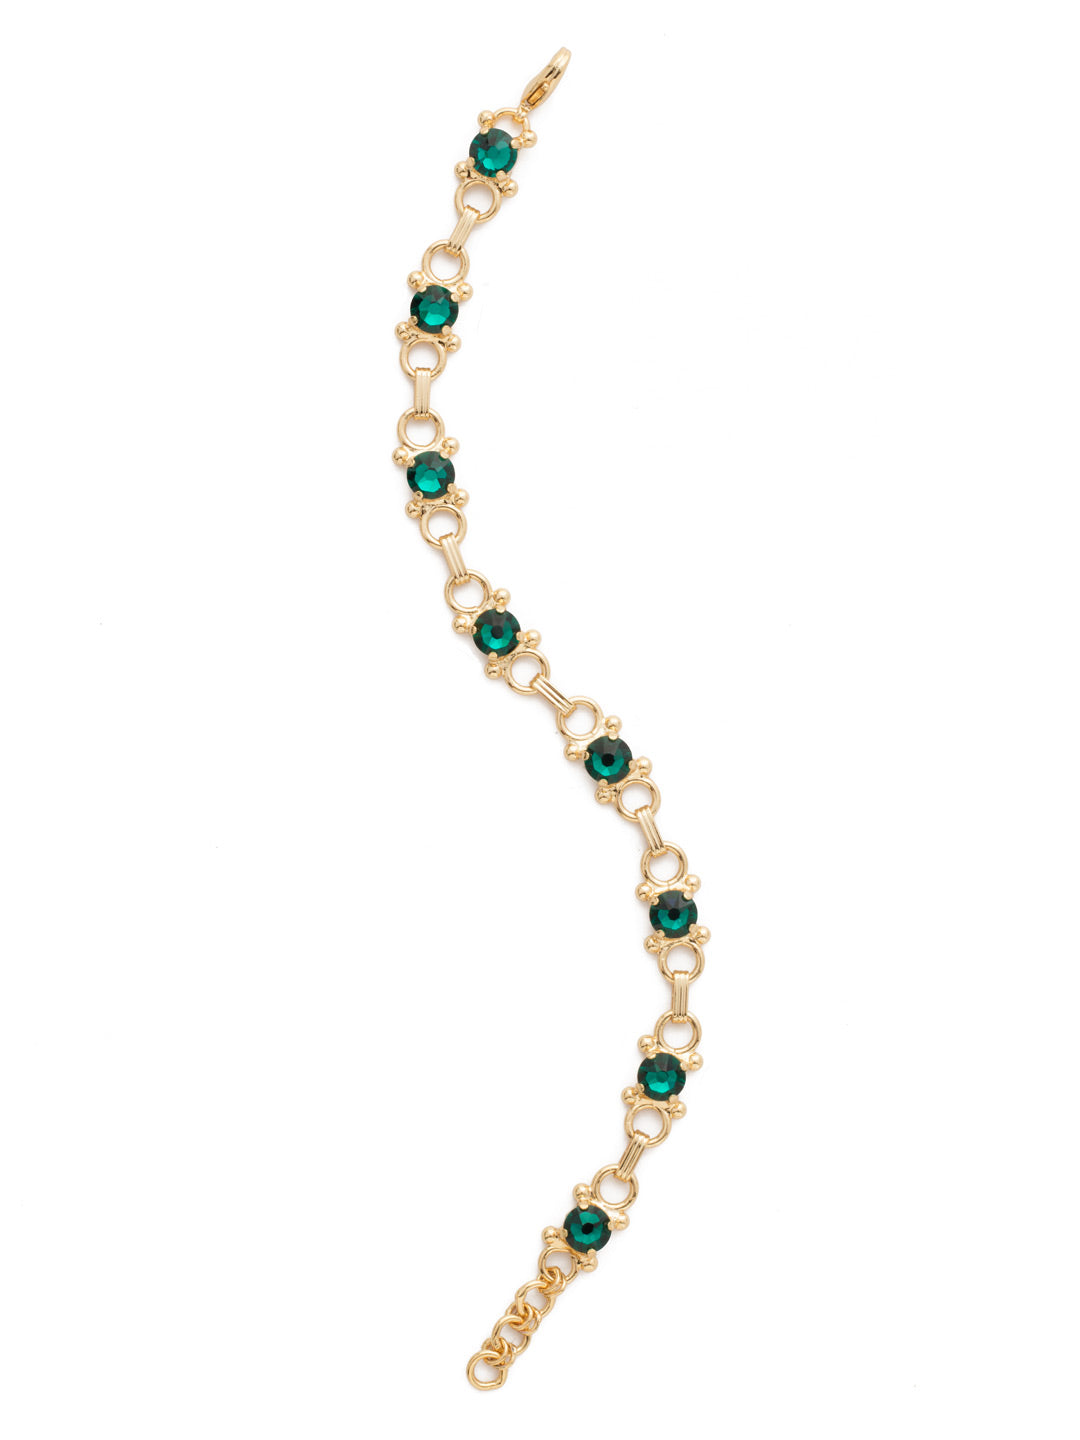 Mini Eyelet Line Bracelet - BDH5BGEME - Our mini Eyelet Line Bracelet offers a classic design with edgy elements. Add this line bracelet to any look for just enough sparkle. From Sorrelli's Emerald collection in our Bright Gold-tone finish.